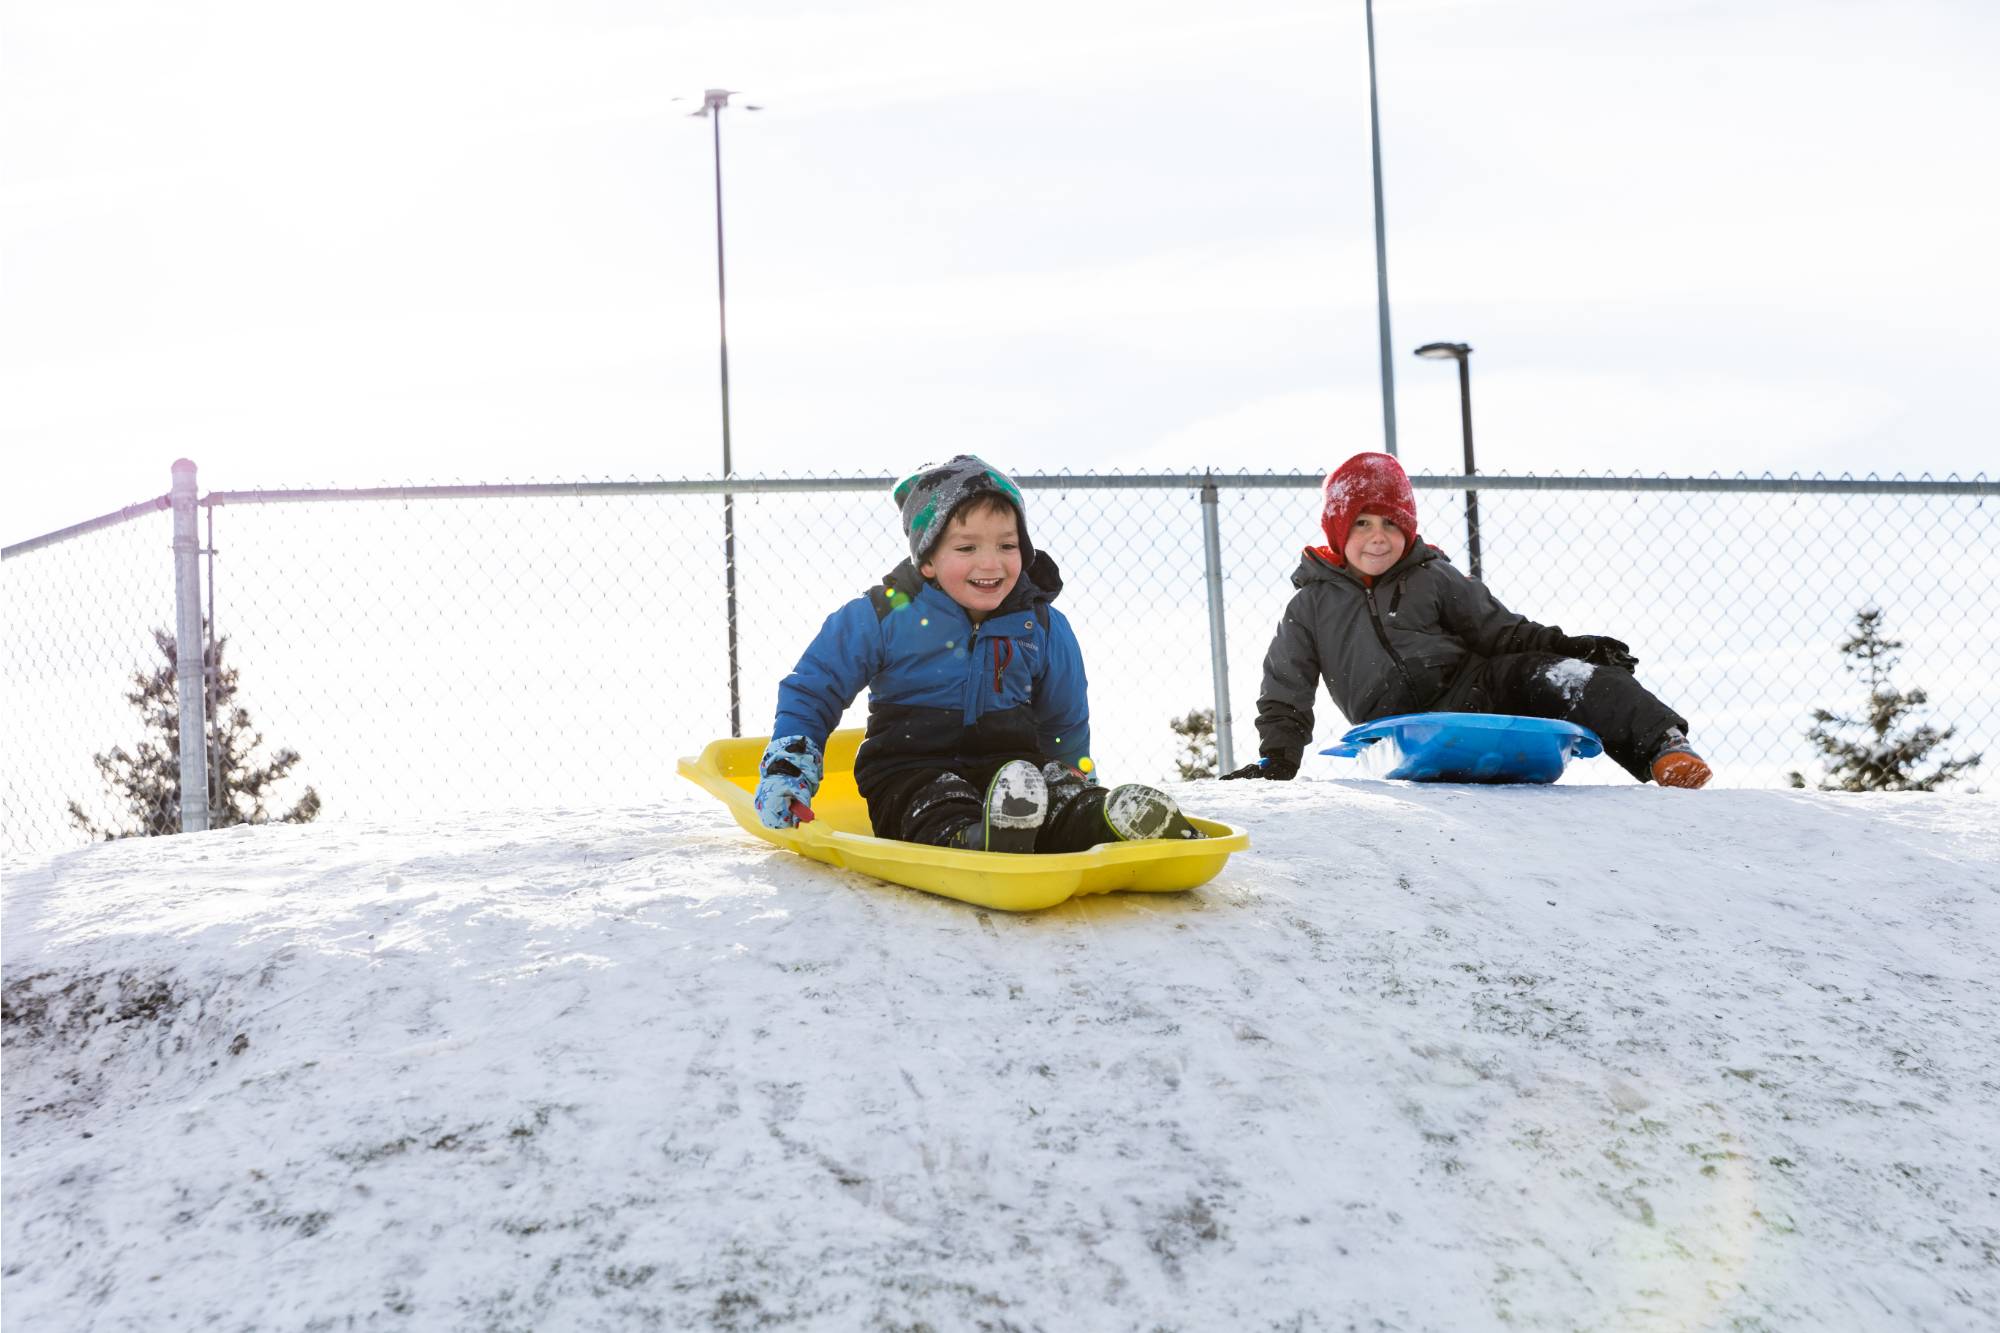 Kids playing on a sledding hill at the Children's Enrichment Center